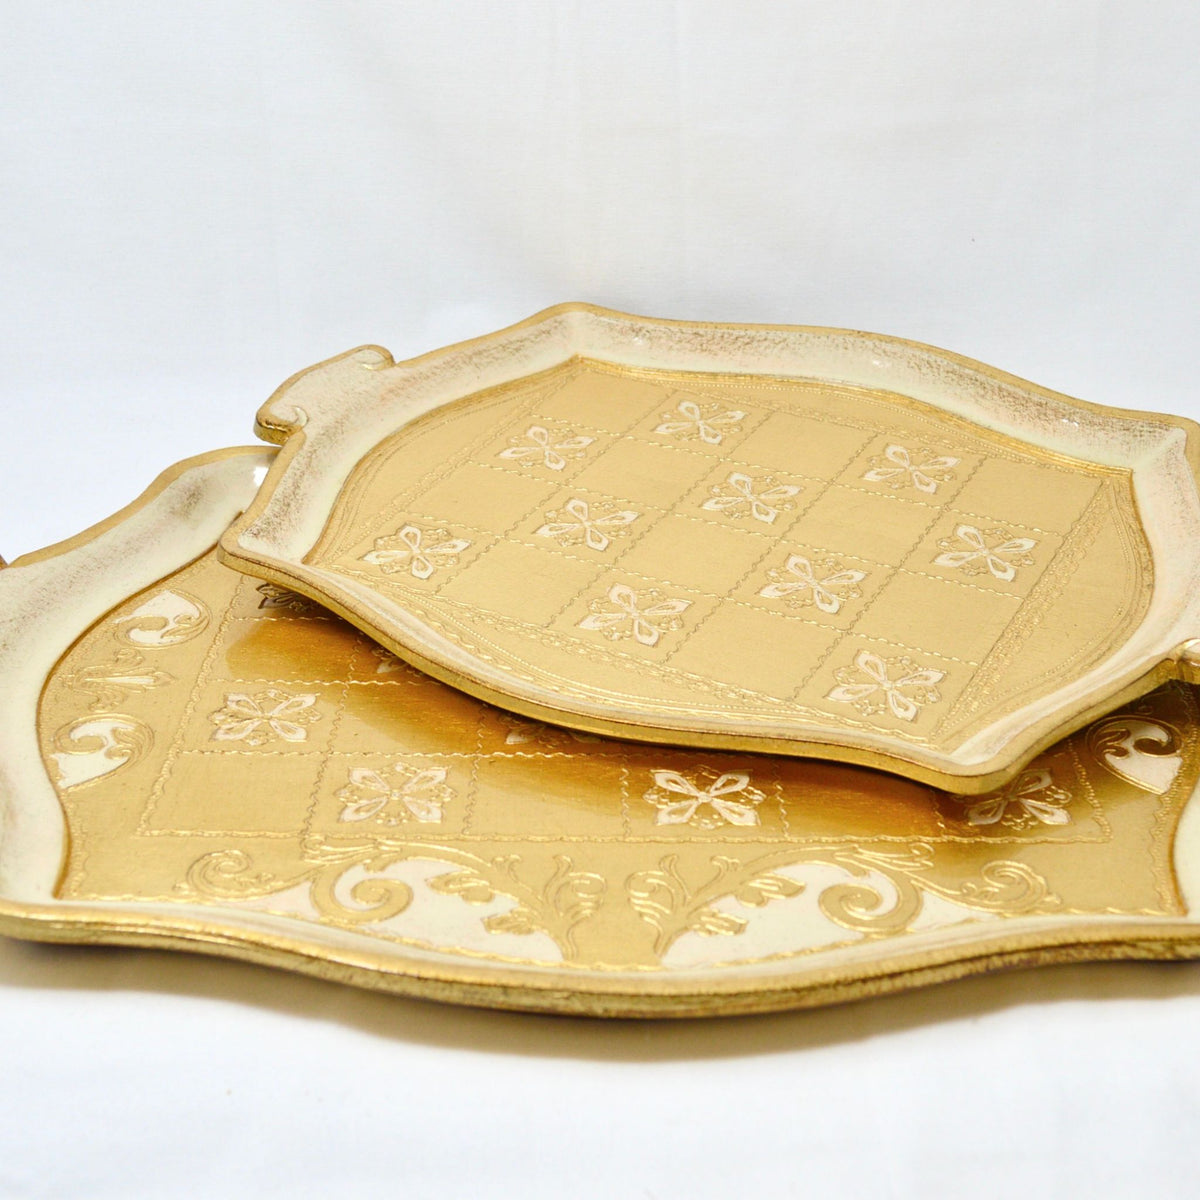 Florentine Carved Wood Tray, Cappuccino, Large or Small, Made in Italy - My Italian Decor